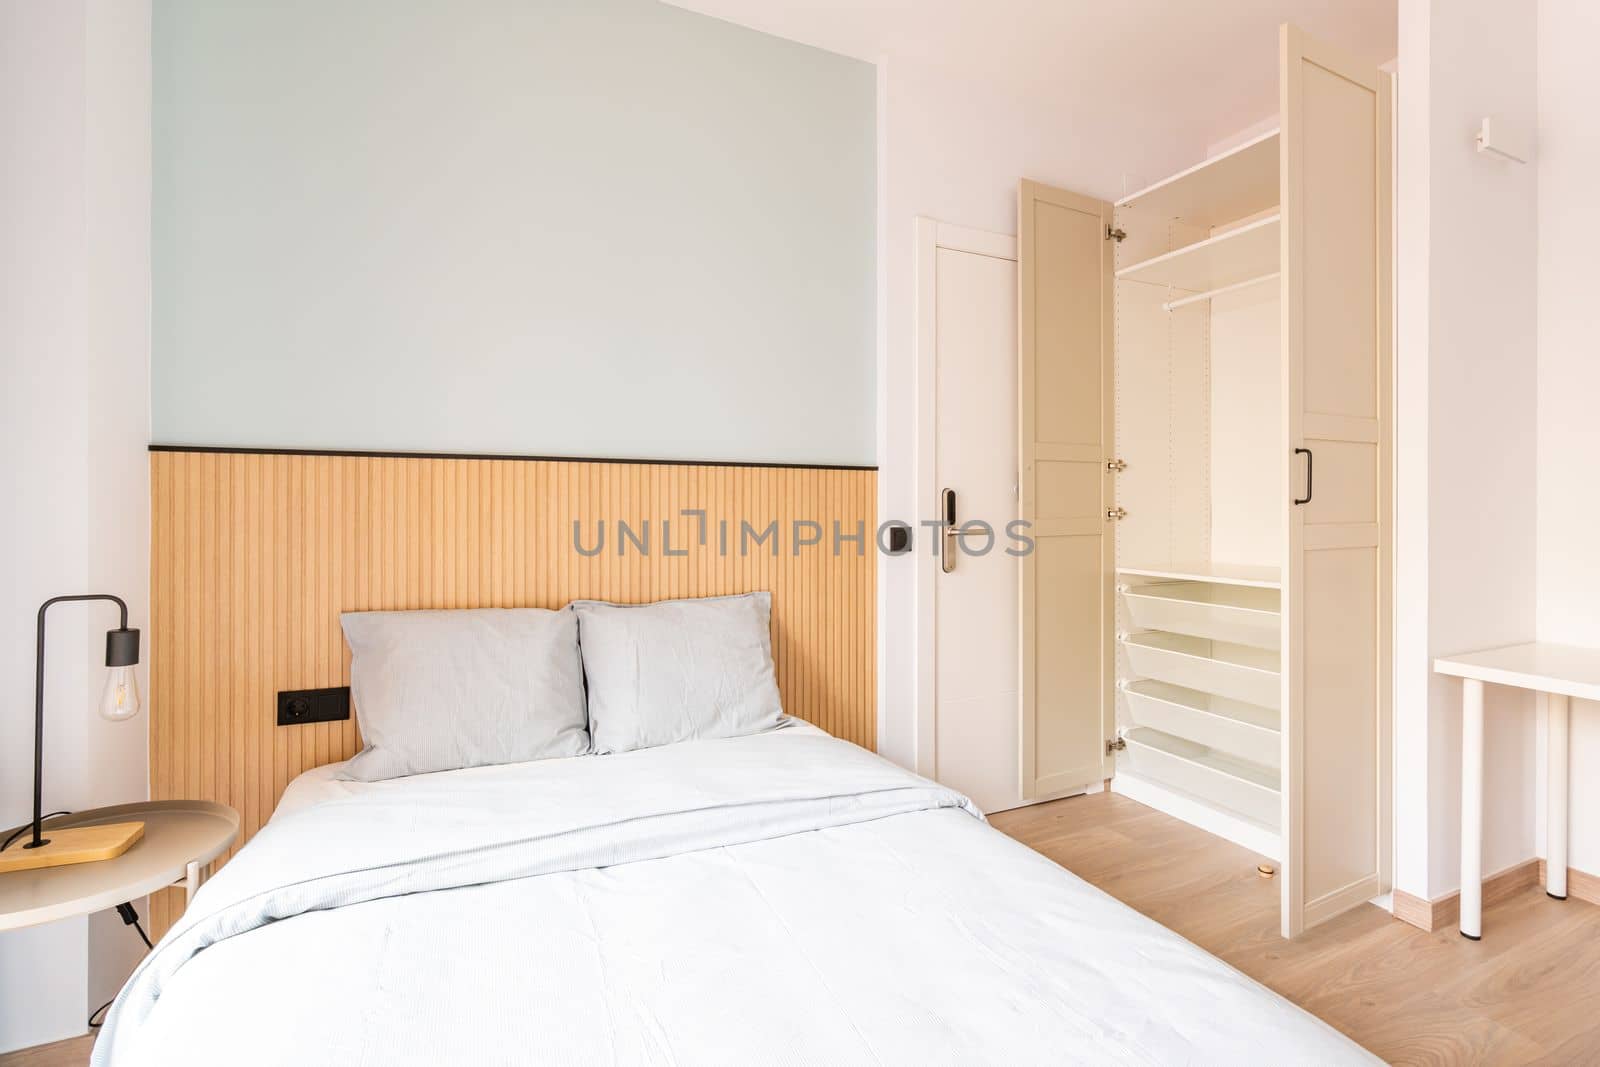 Hotel room with large double bed, beautiful linens. There is wood paneling on wall at headboard. Large wardrobe for clothes and shoes. The door is electronically locked with digital code. by apavlin